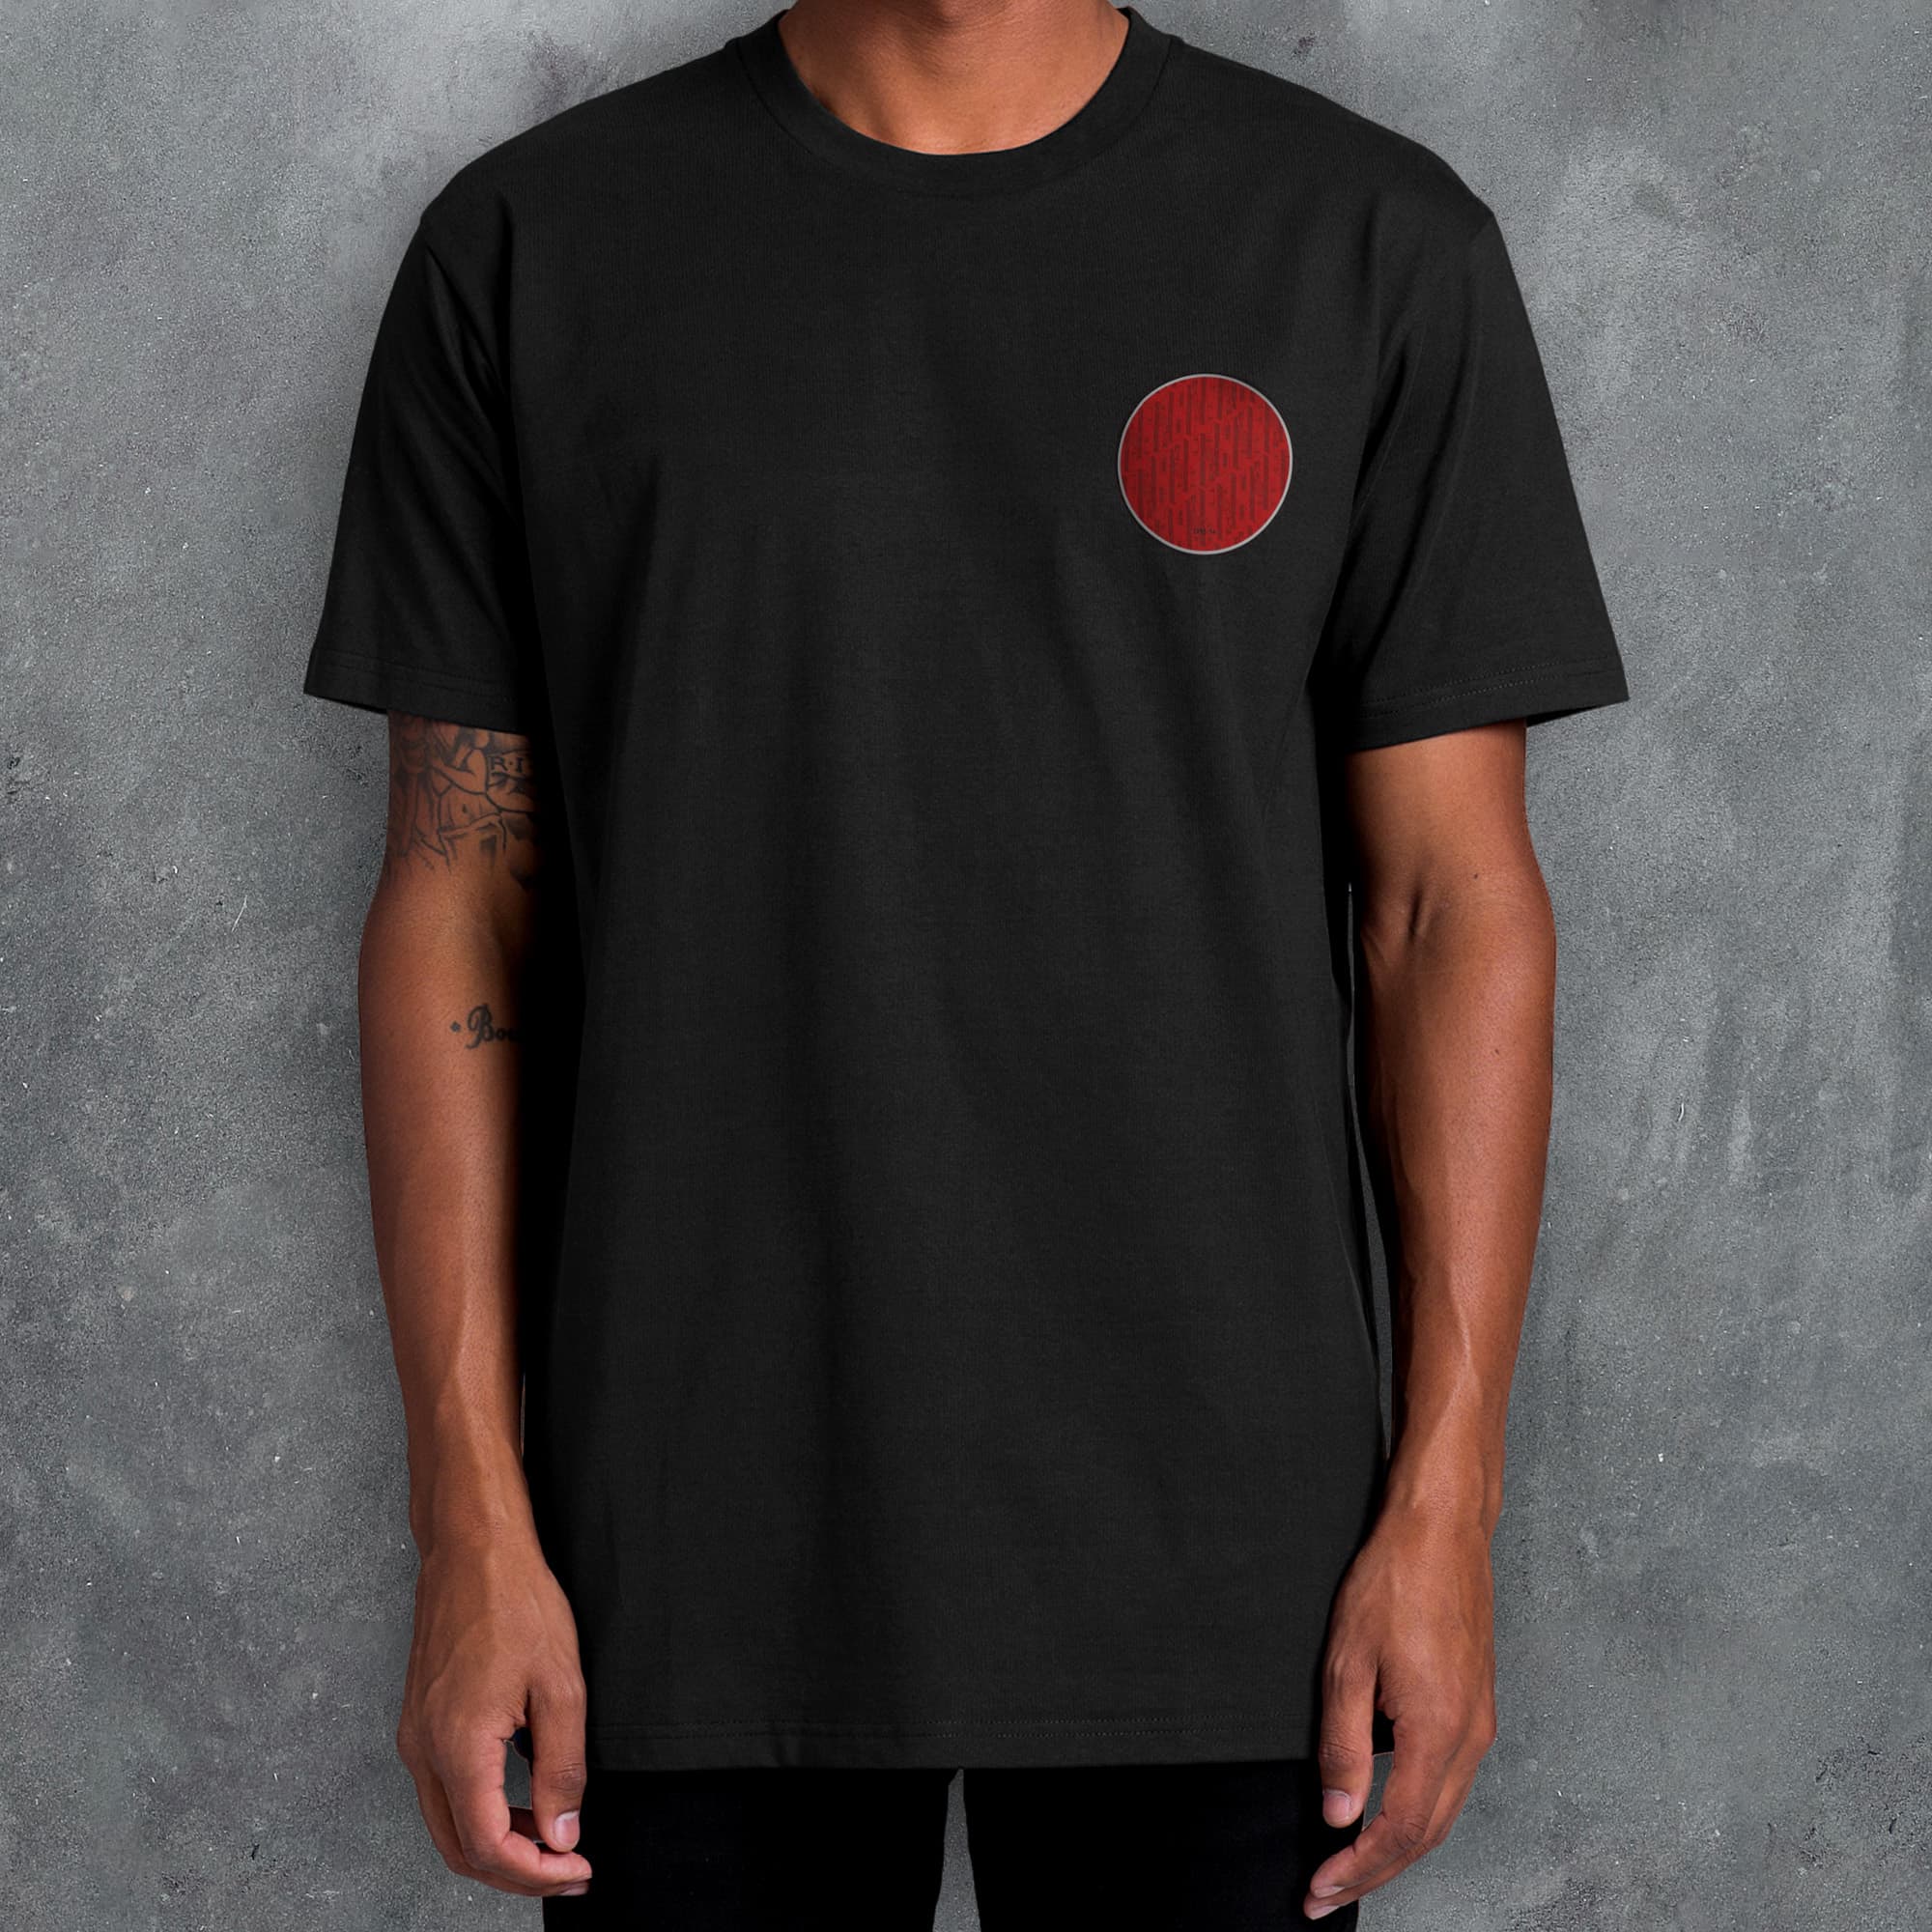 a man wearing a black shirt with a red circle on it